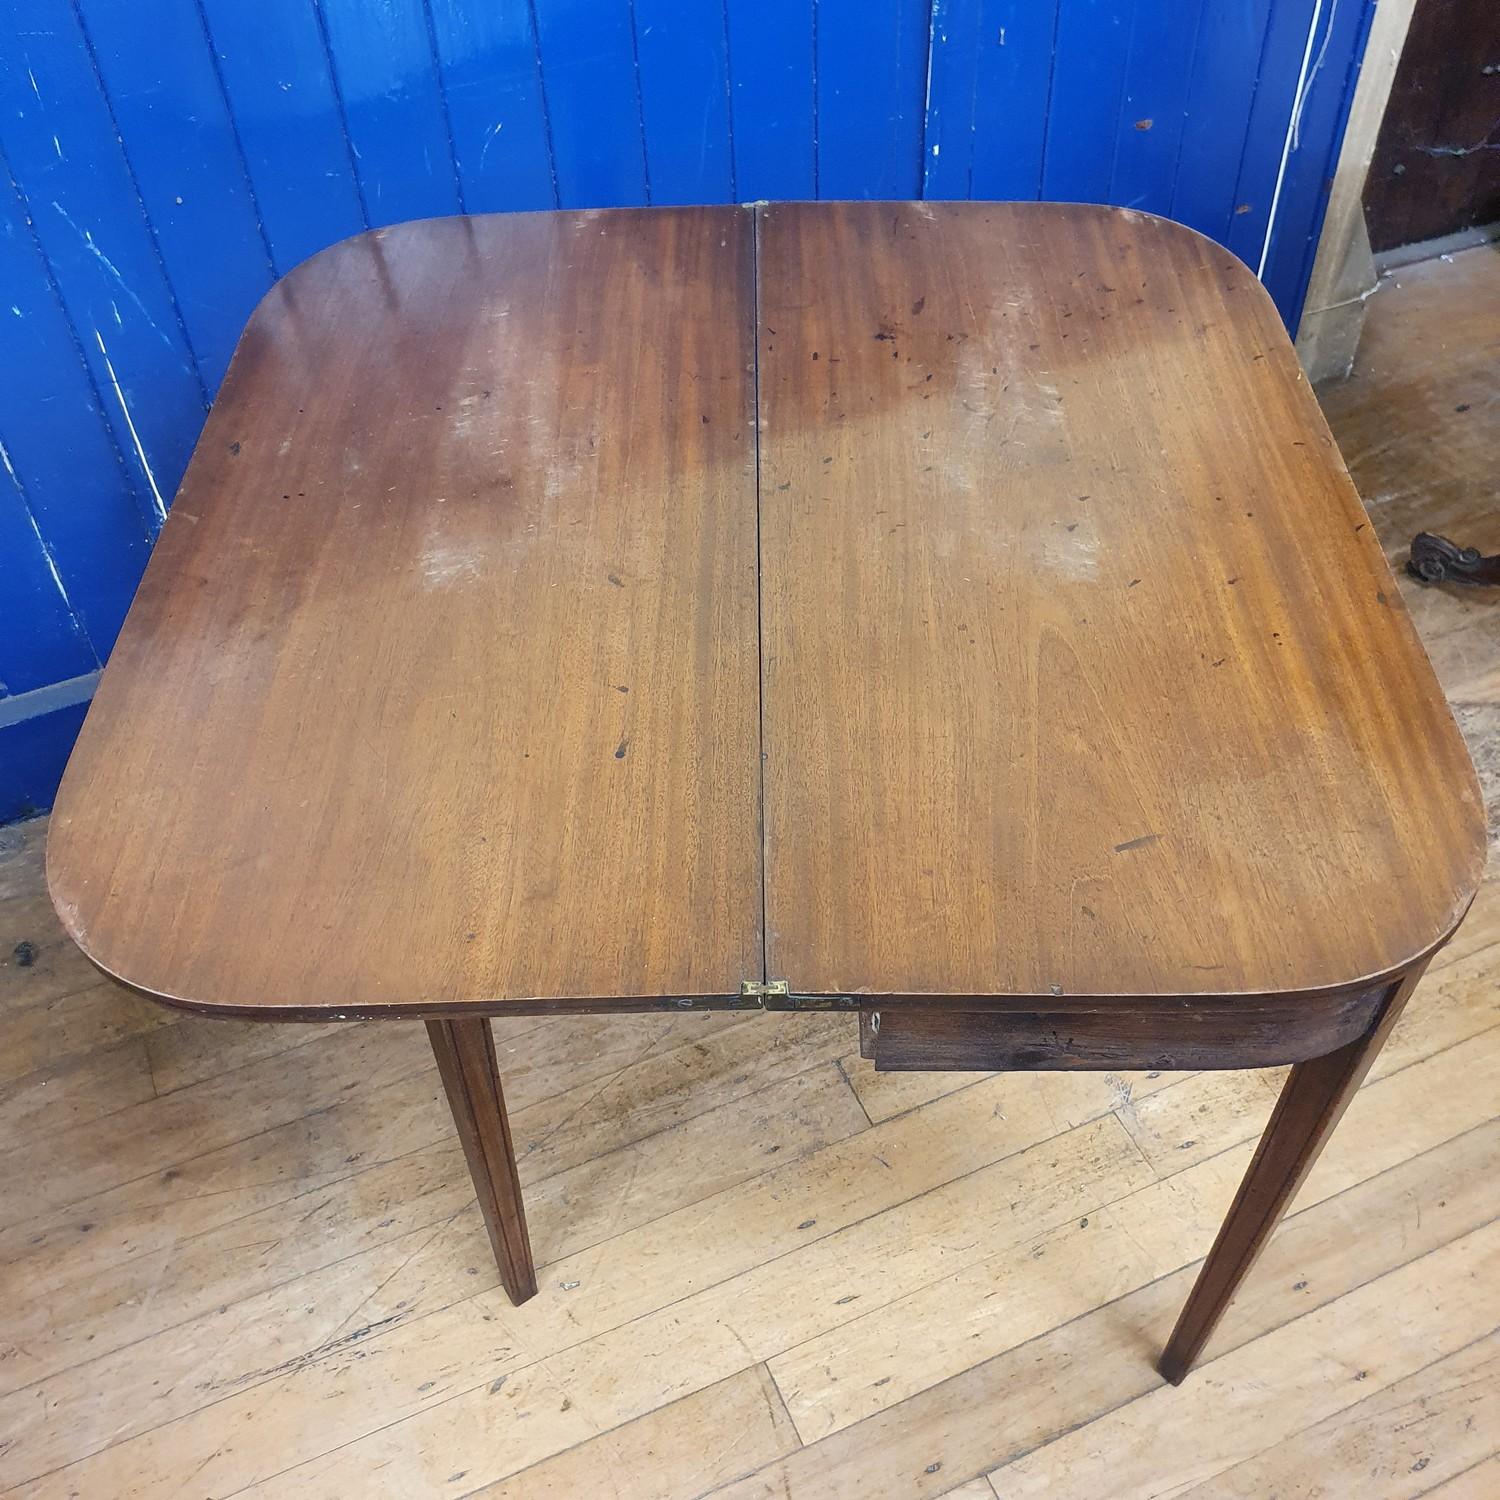 A 19th century mahogany folding tea table, 89 cm wide Top very faded from sun damage - Image 3 of 4